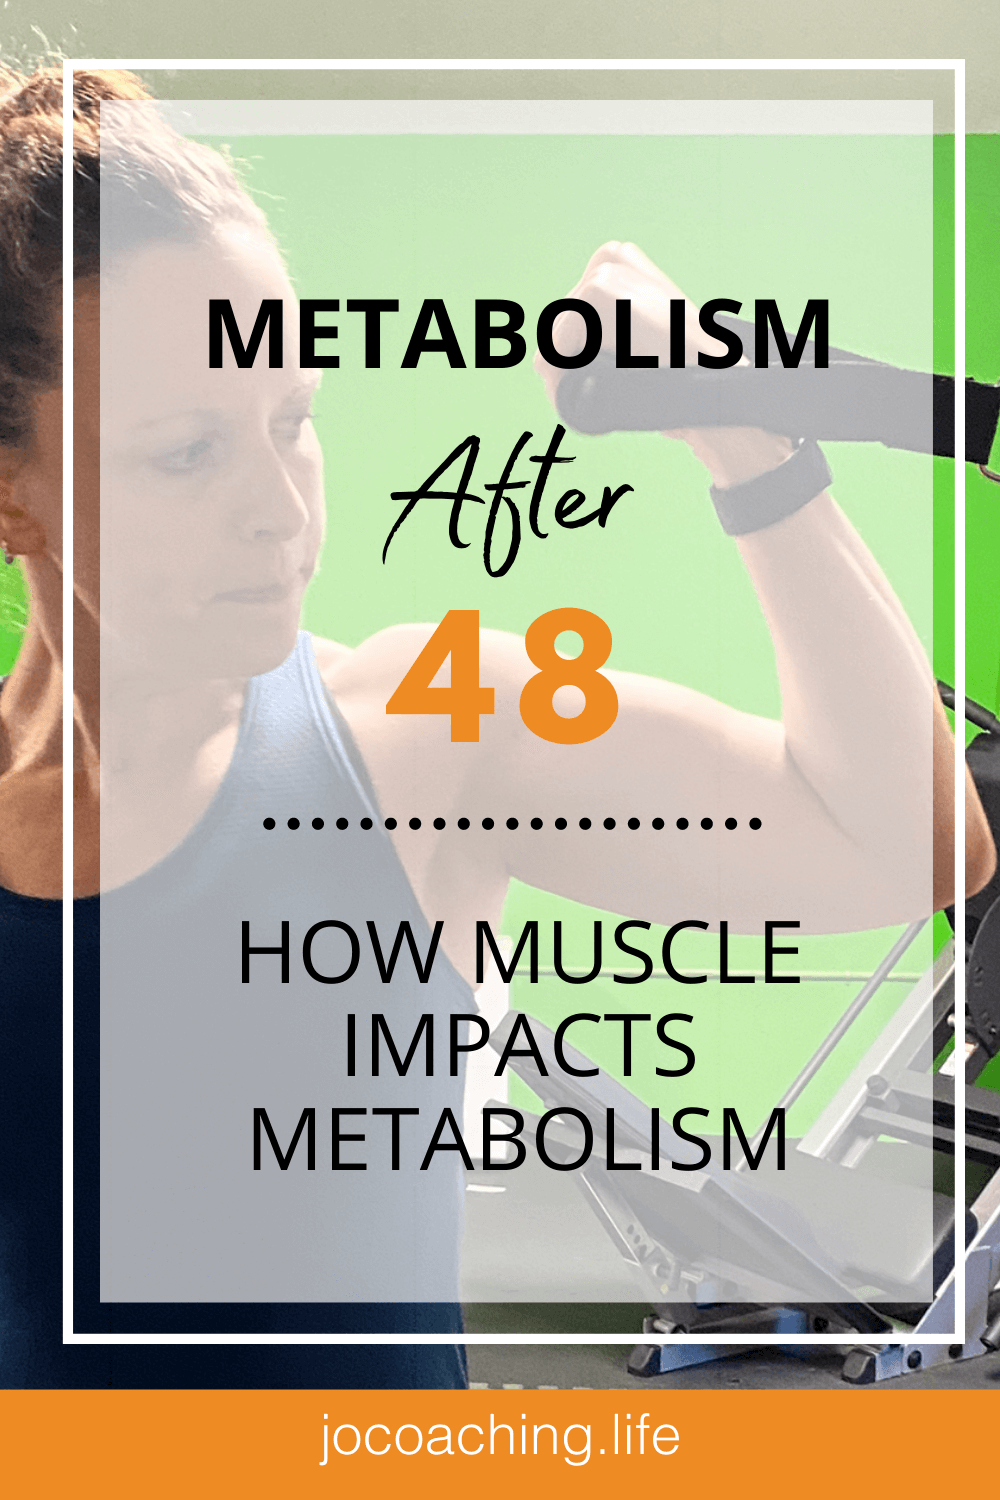 Metabolism after 48 – How Muscle Impacts Metabolism